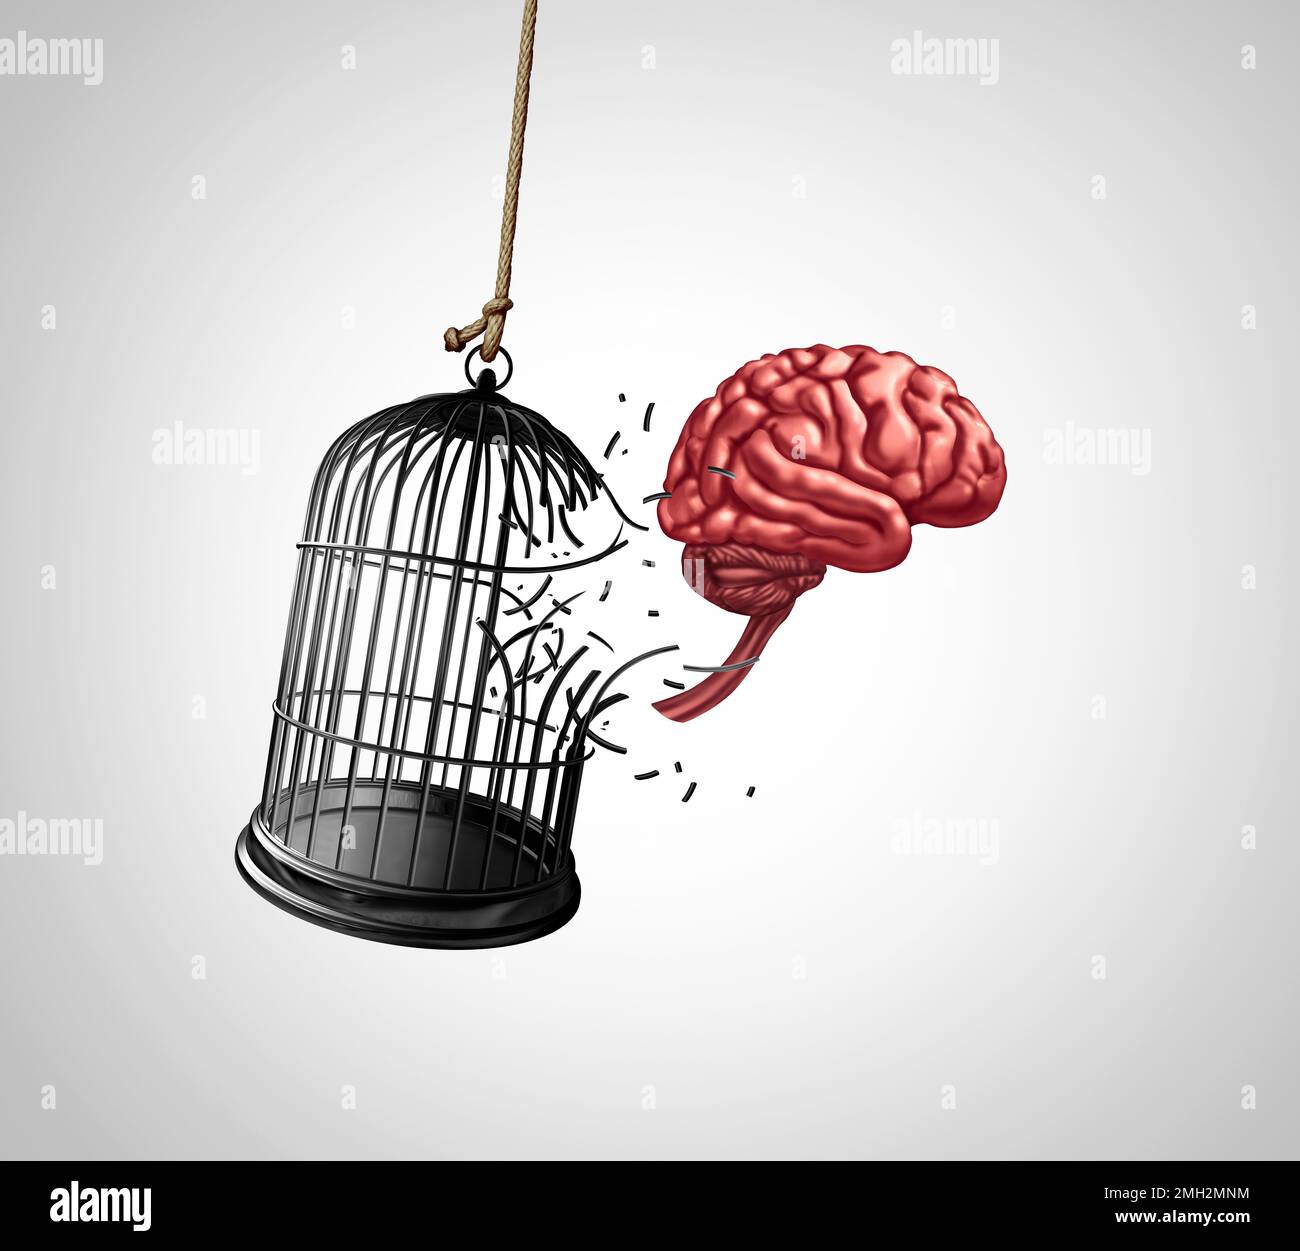 Breaking Free From Mental Confinement and unleashing the mind or escaping cognitive restriction human brain itself free from psychological Stock Photo